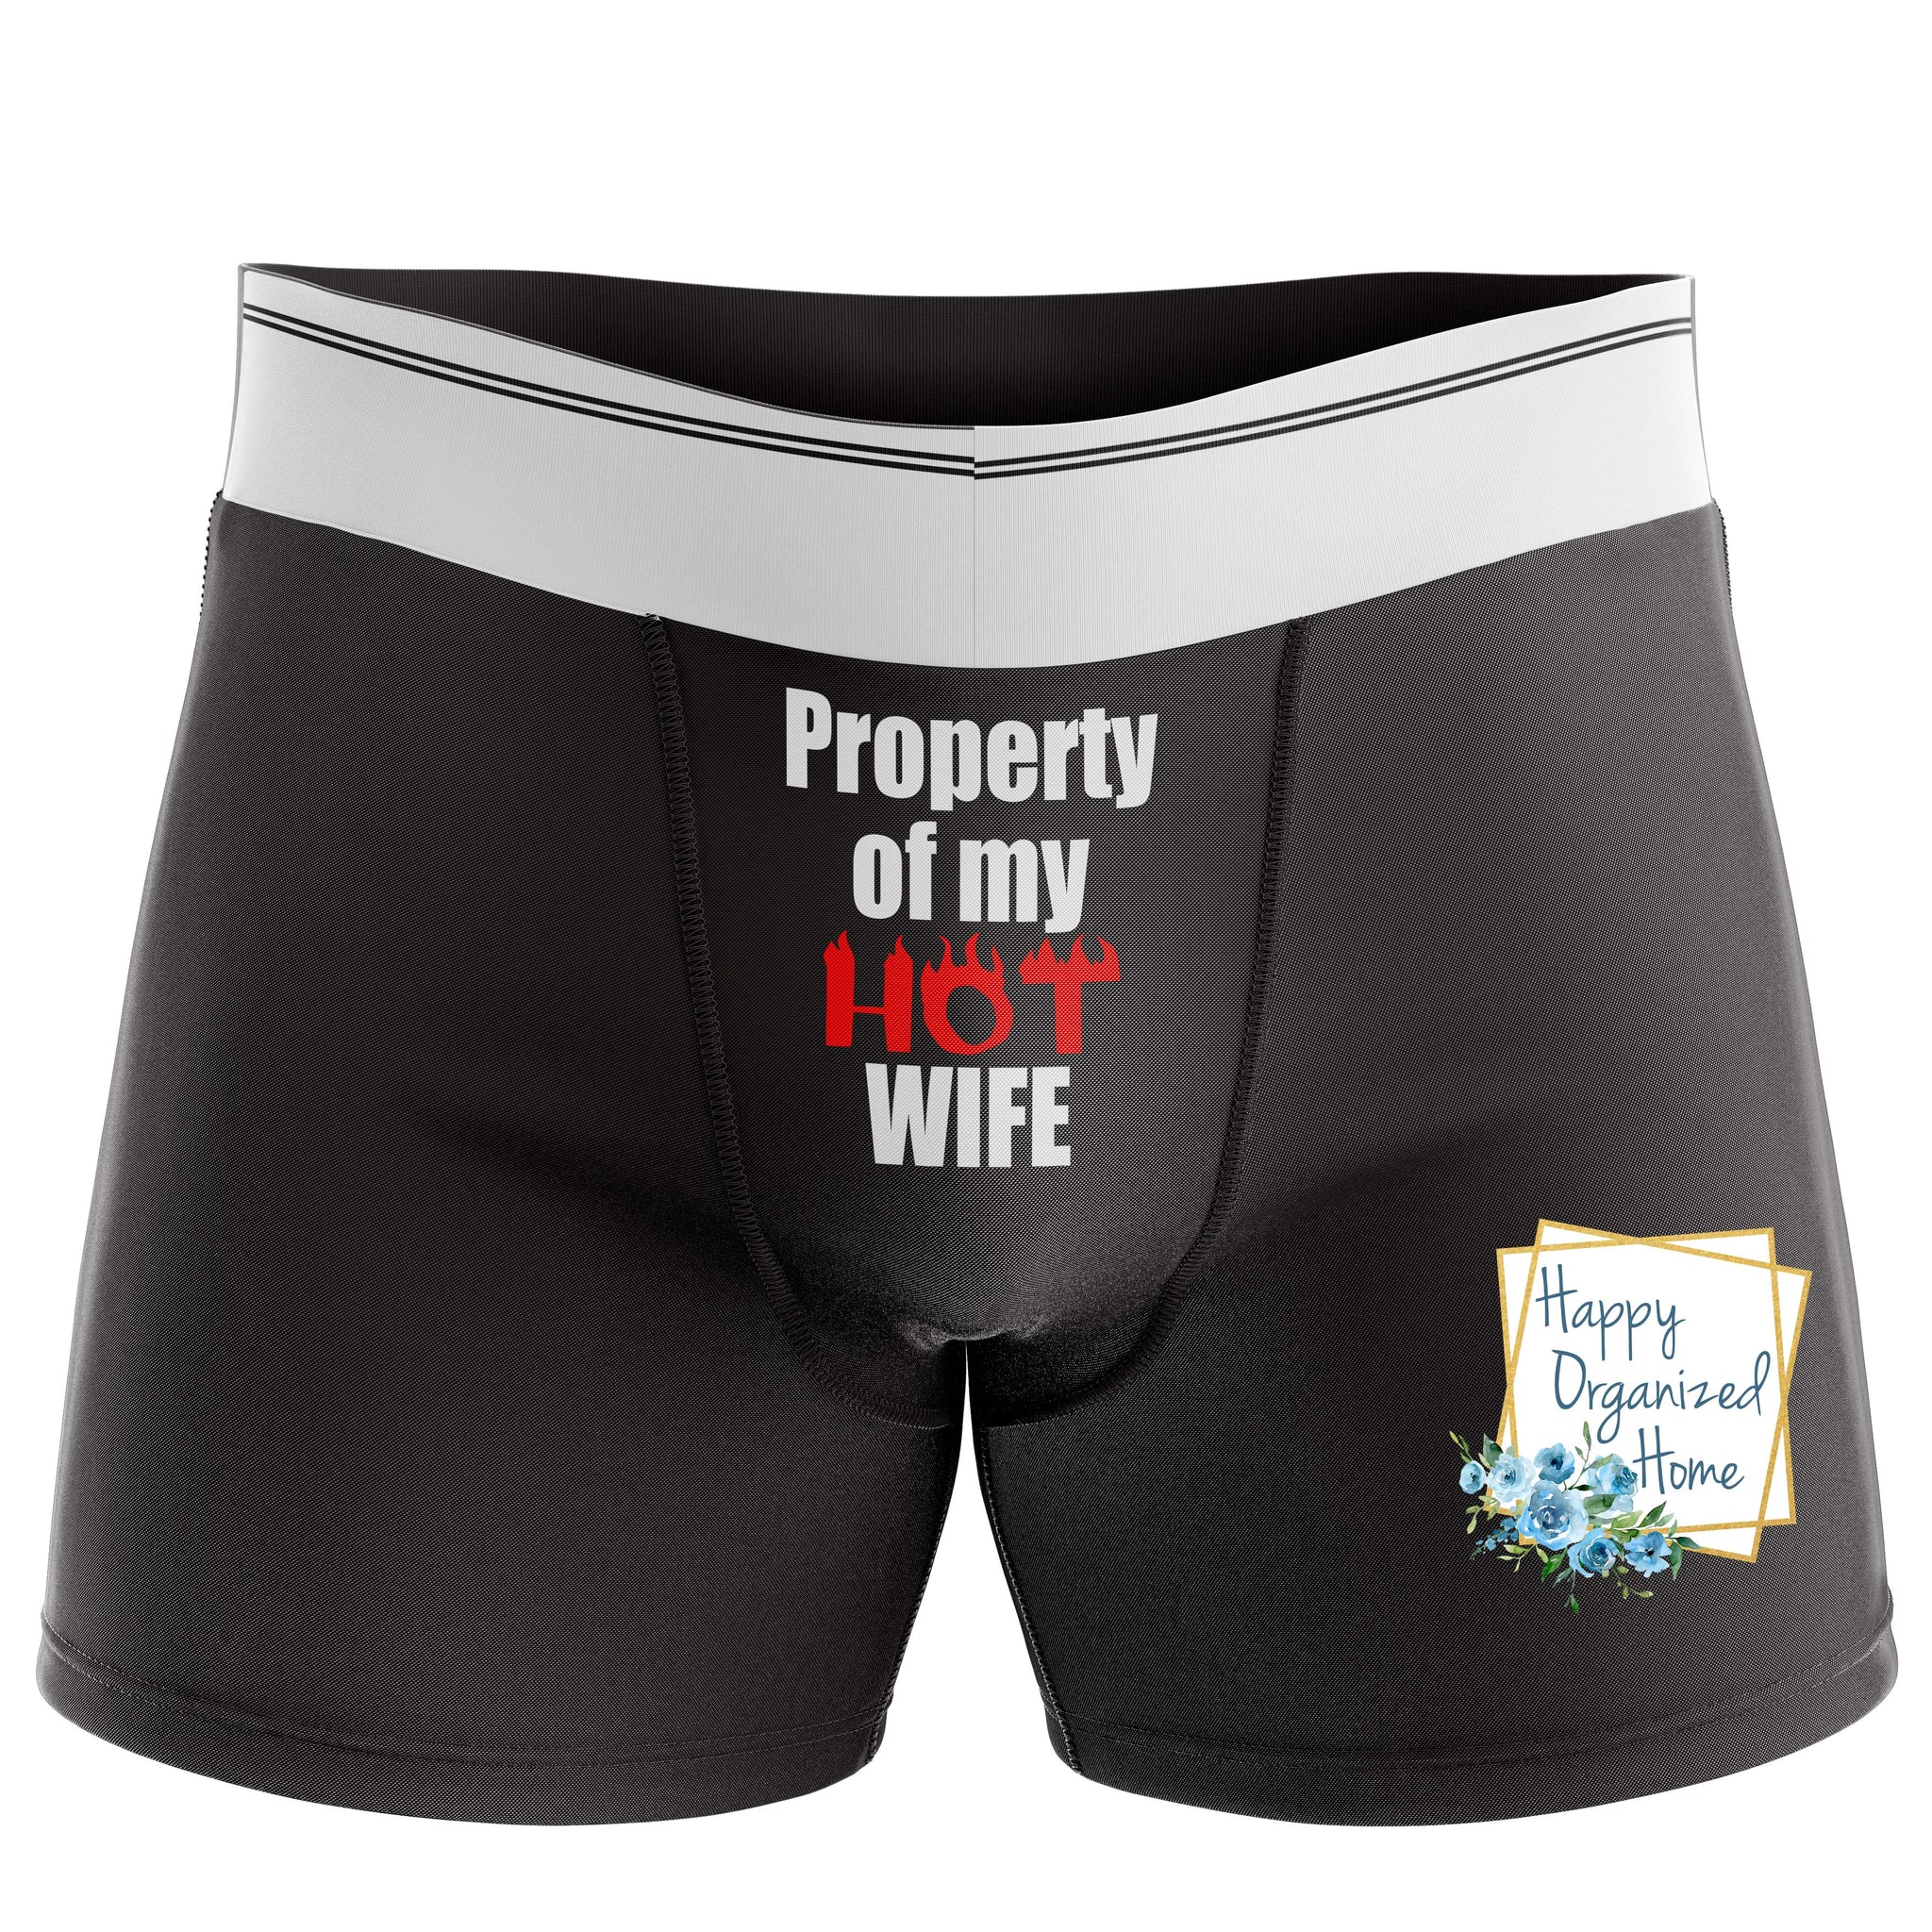 Property of my HOT wife - Men's Naughty Boxer Briefs – Happy Organized Home